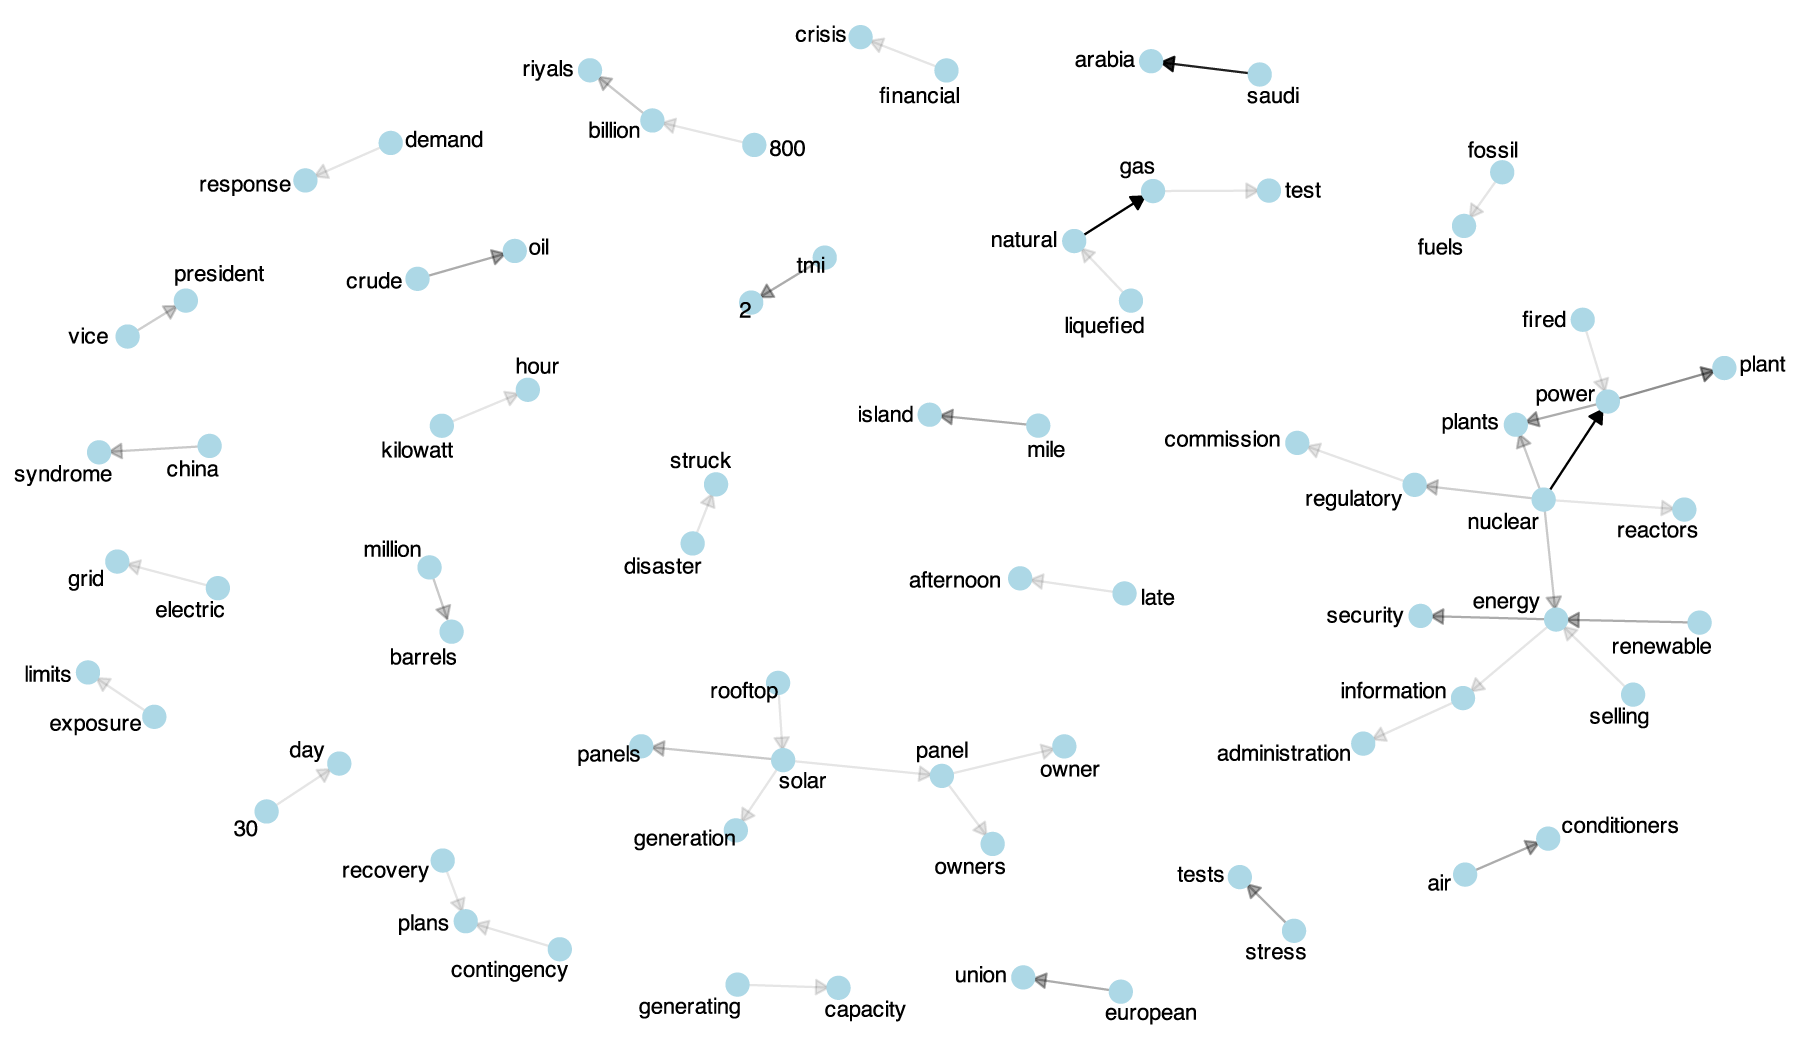 Network map of topics discussed in the news media in 2014